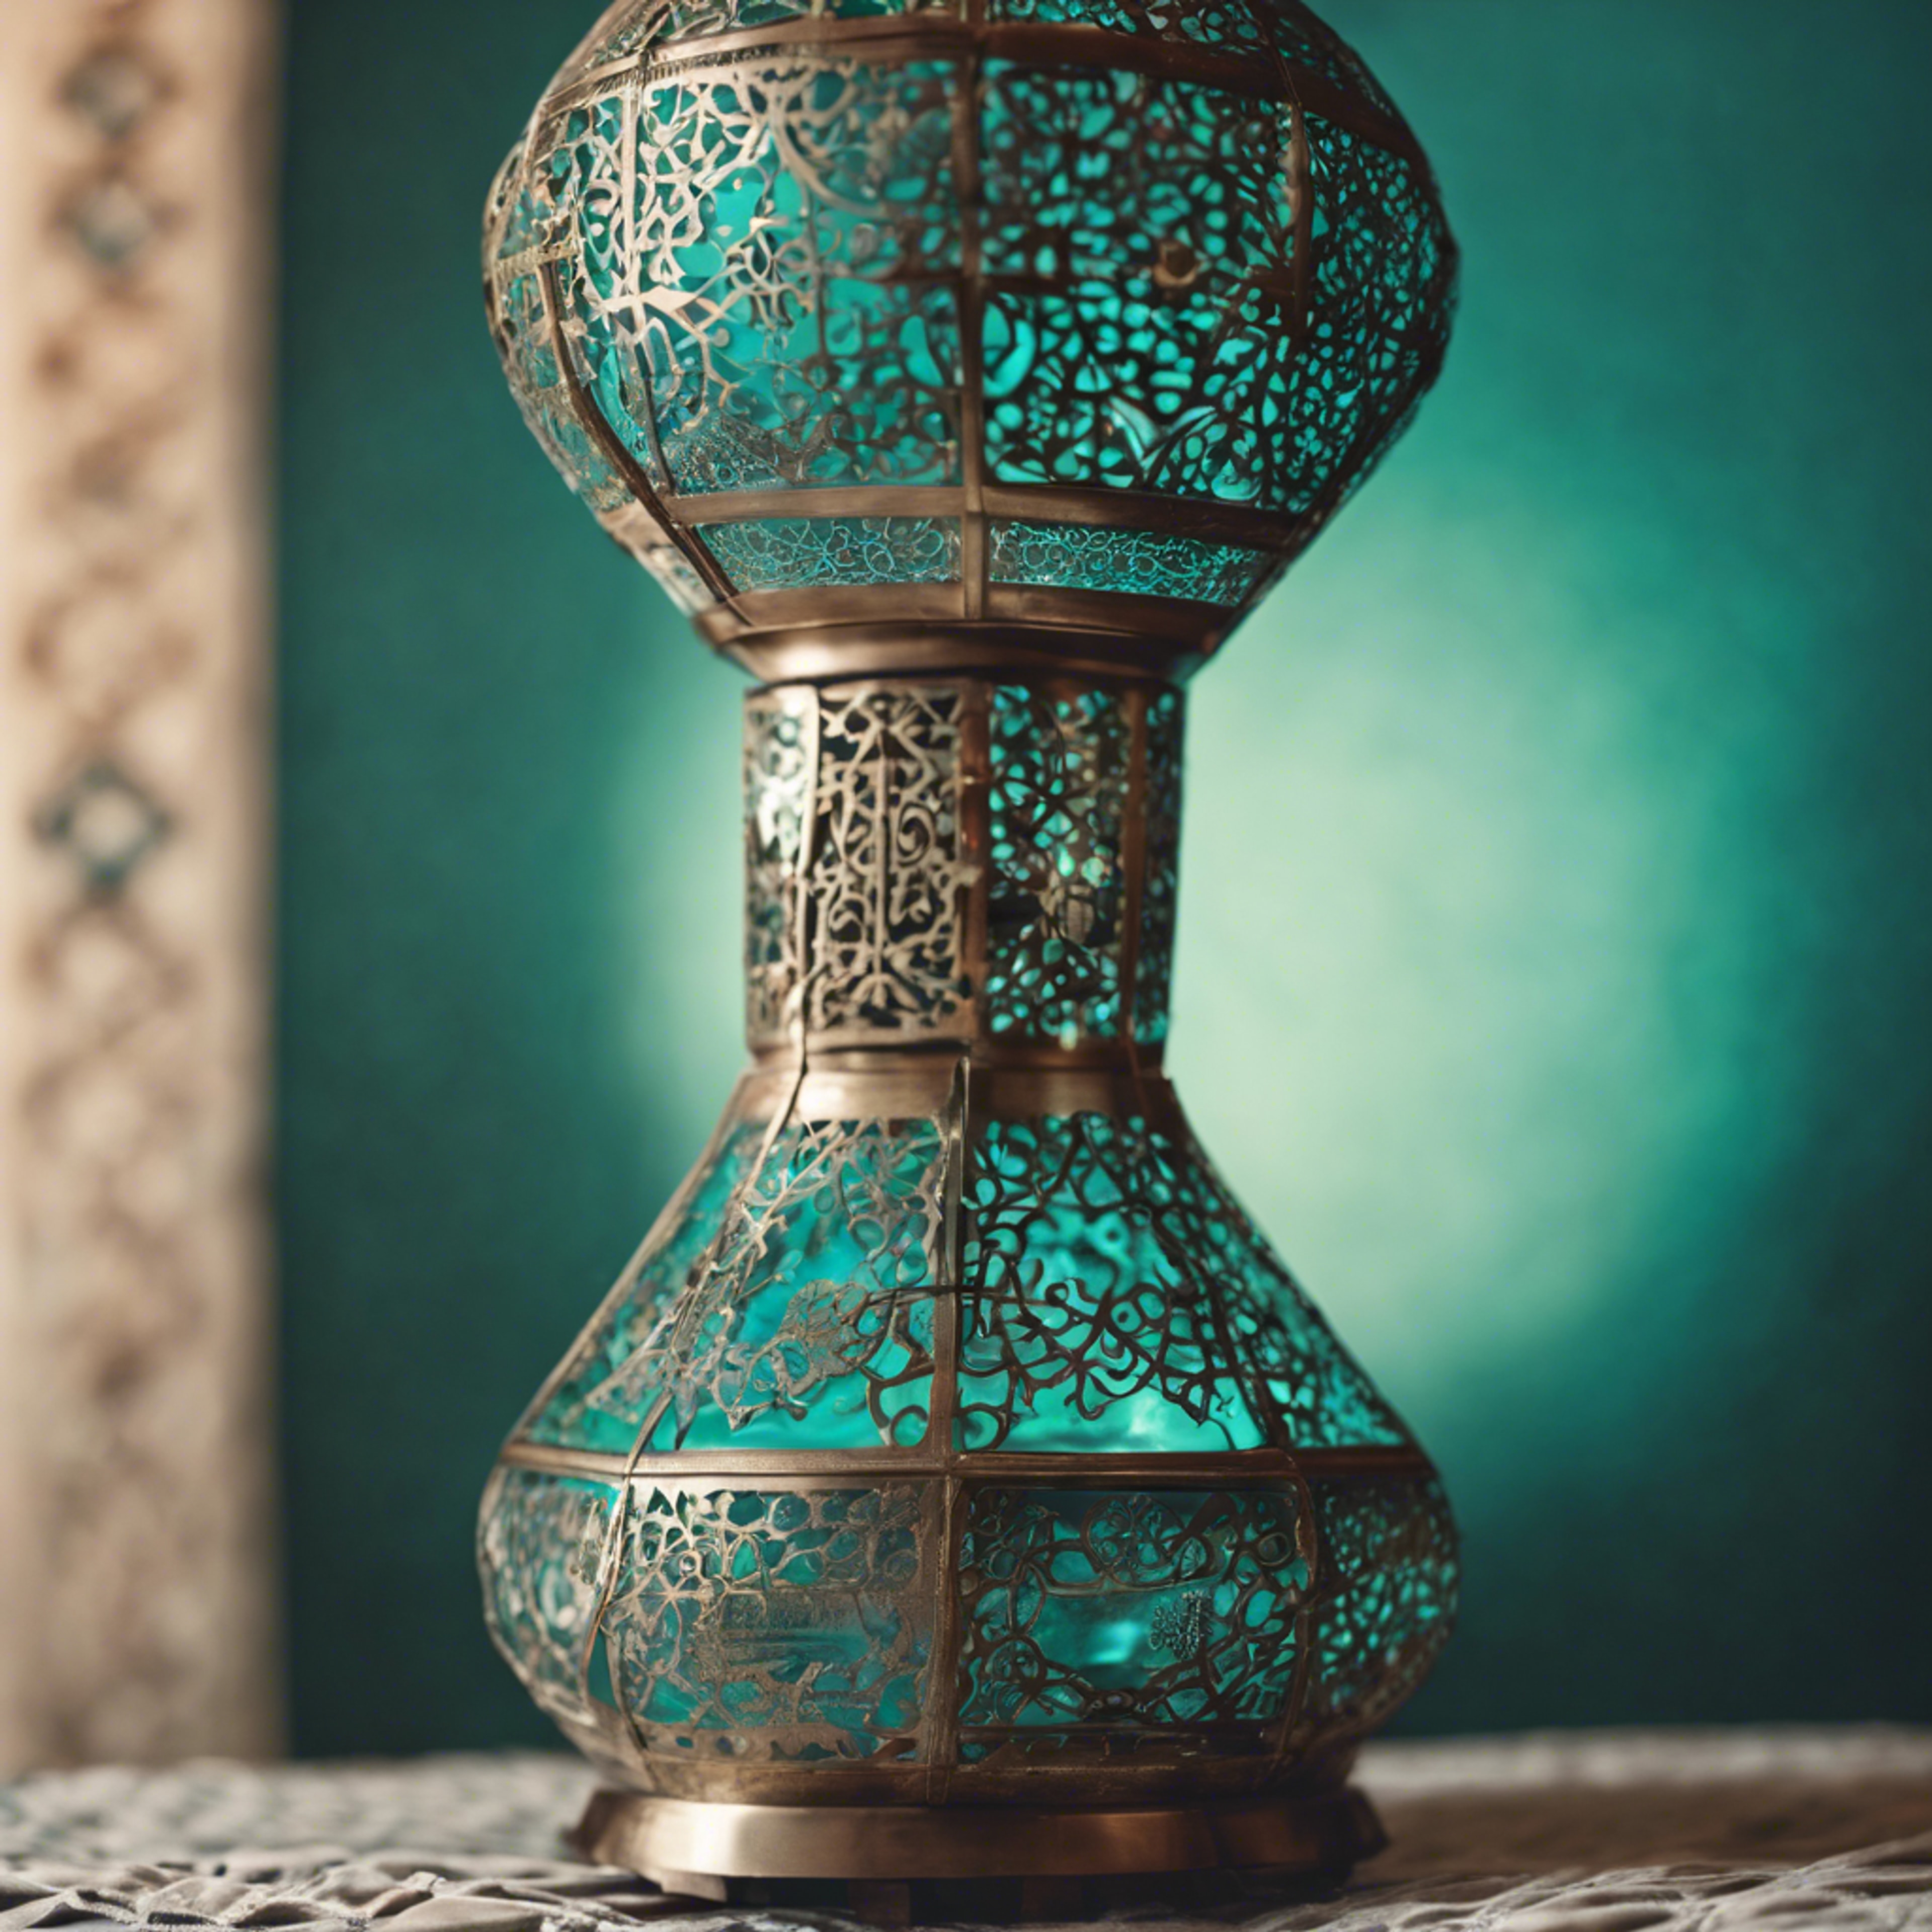 A traditional Moroccan lamp in a cool teal color. Ταπετσαρία[a27f0371dbce4744aca5]